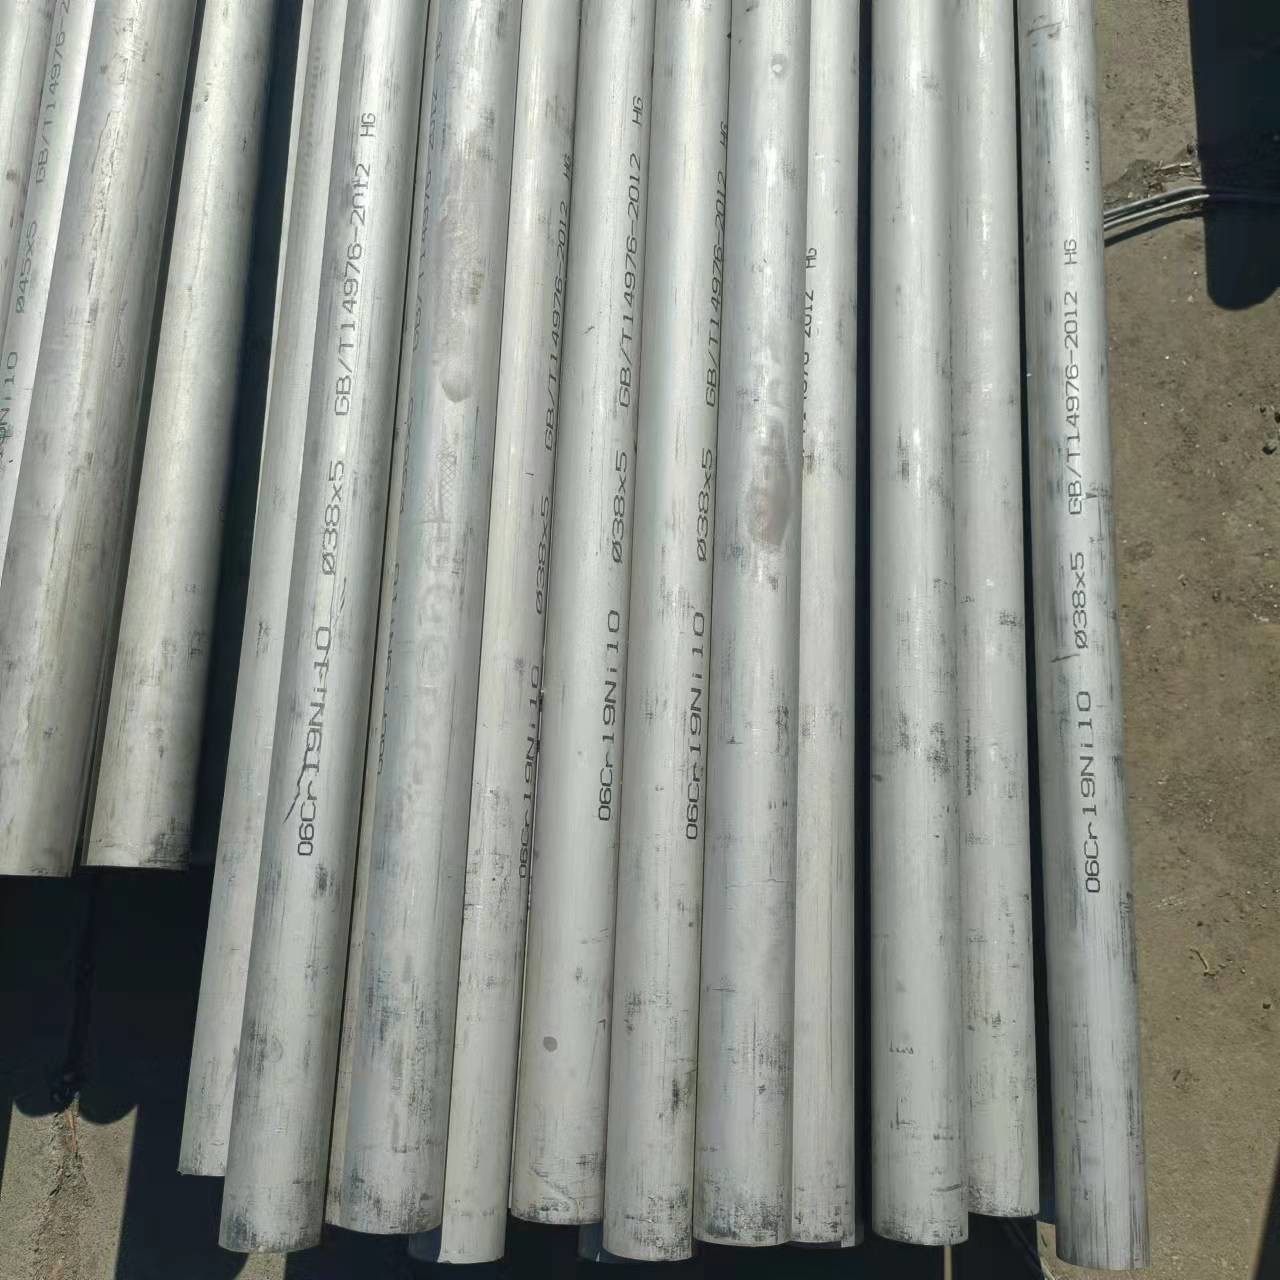 Stainless Steel Pipe (316L 304L 316ln 310S 316ti 347H 310moln 1.4835 1.4845 1.4404 1.4301 1.4571)